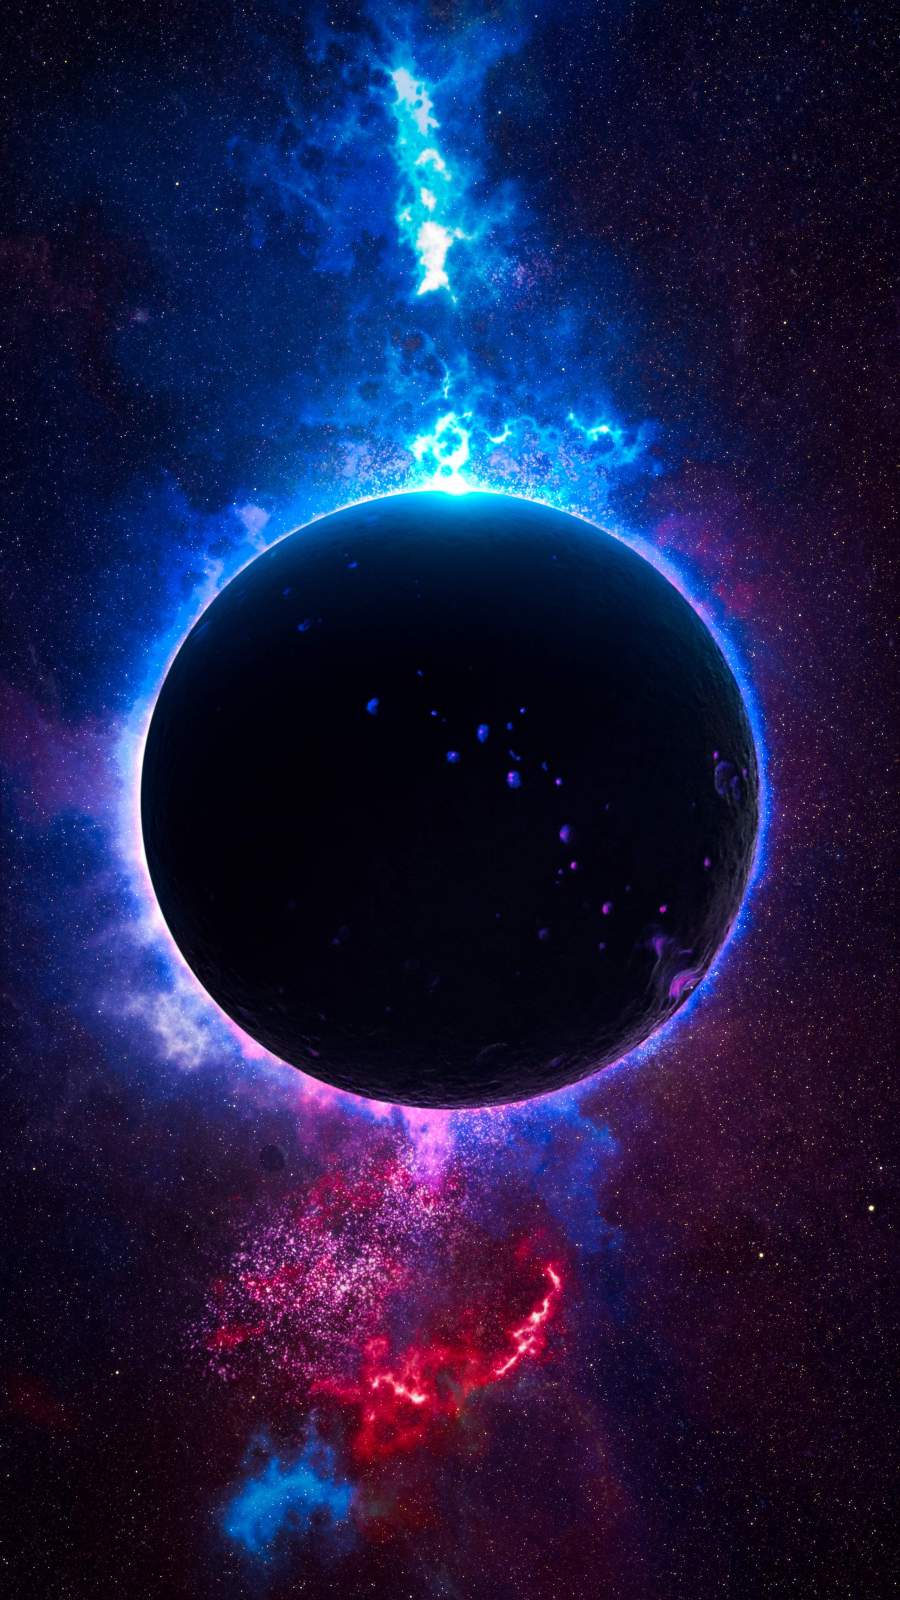 Black Hole - IPhone Wallpapers : iPhone Wallpapers